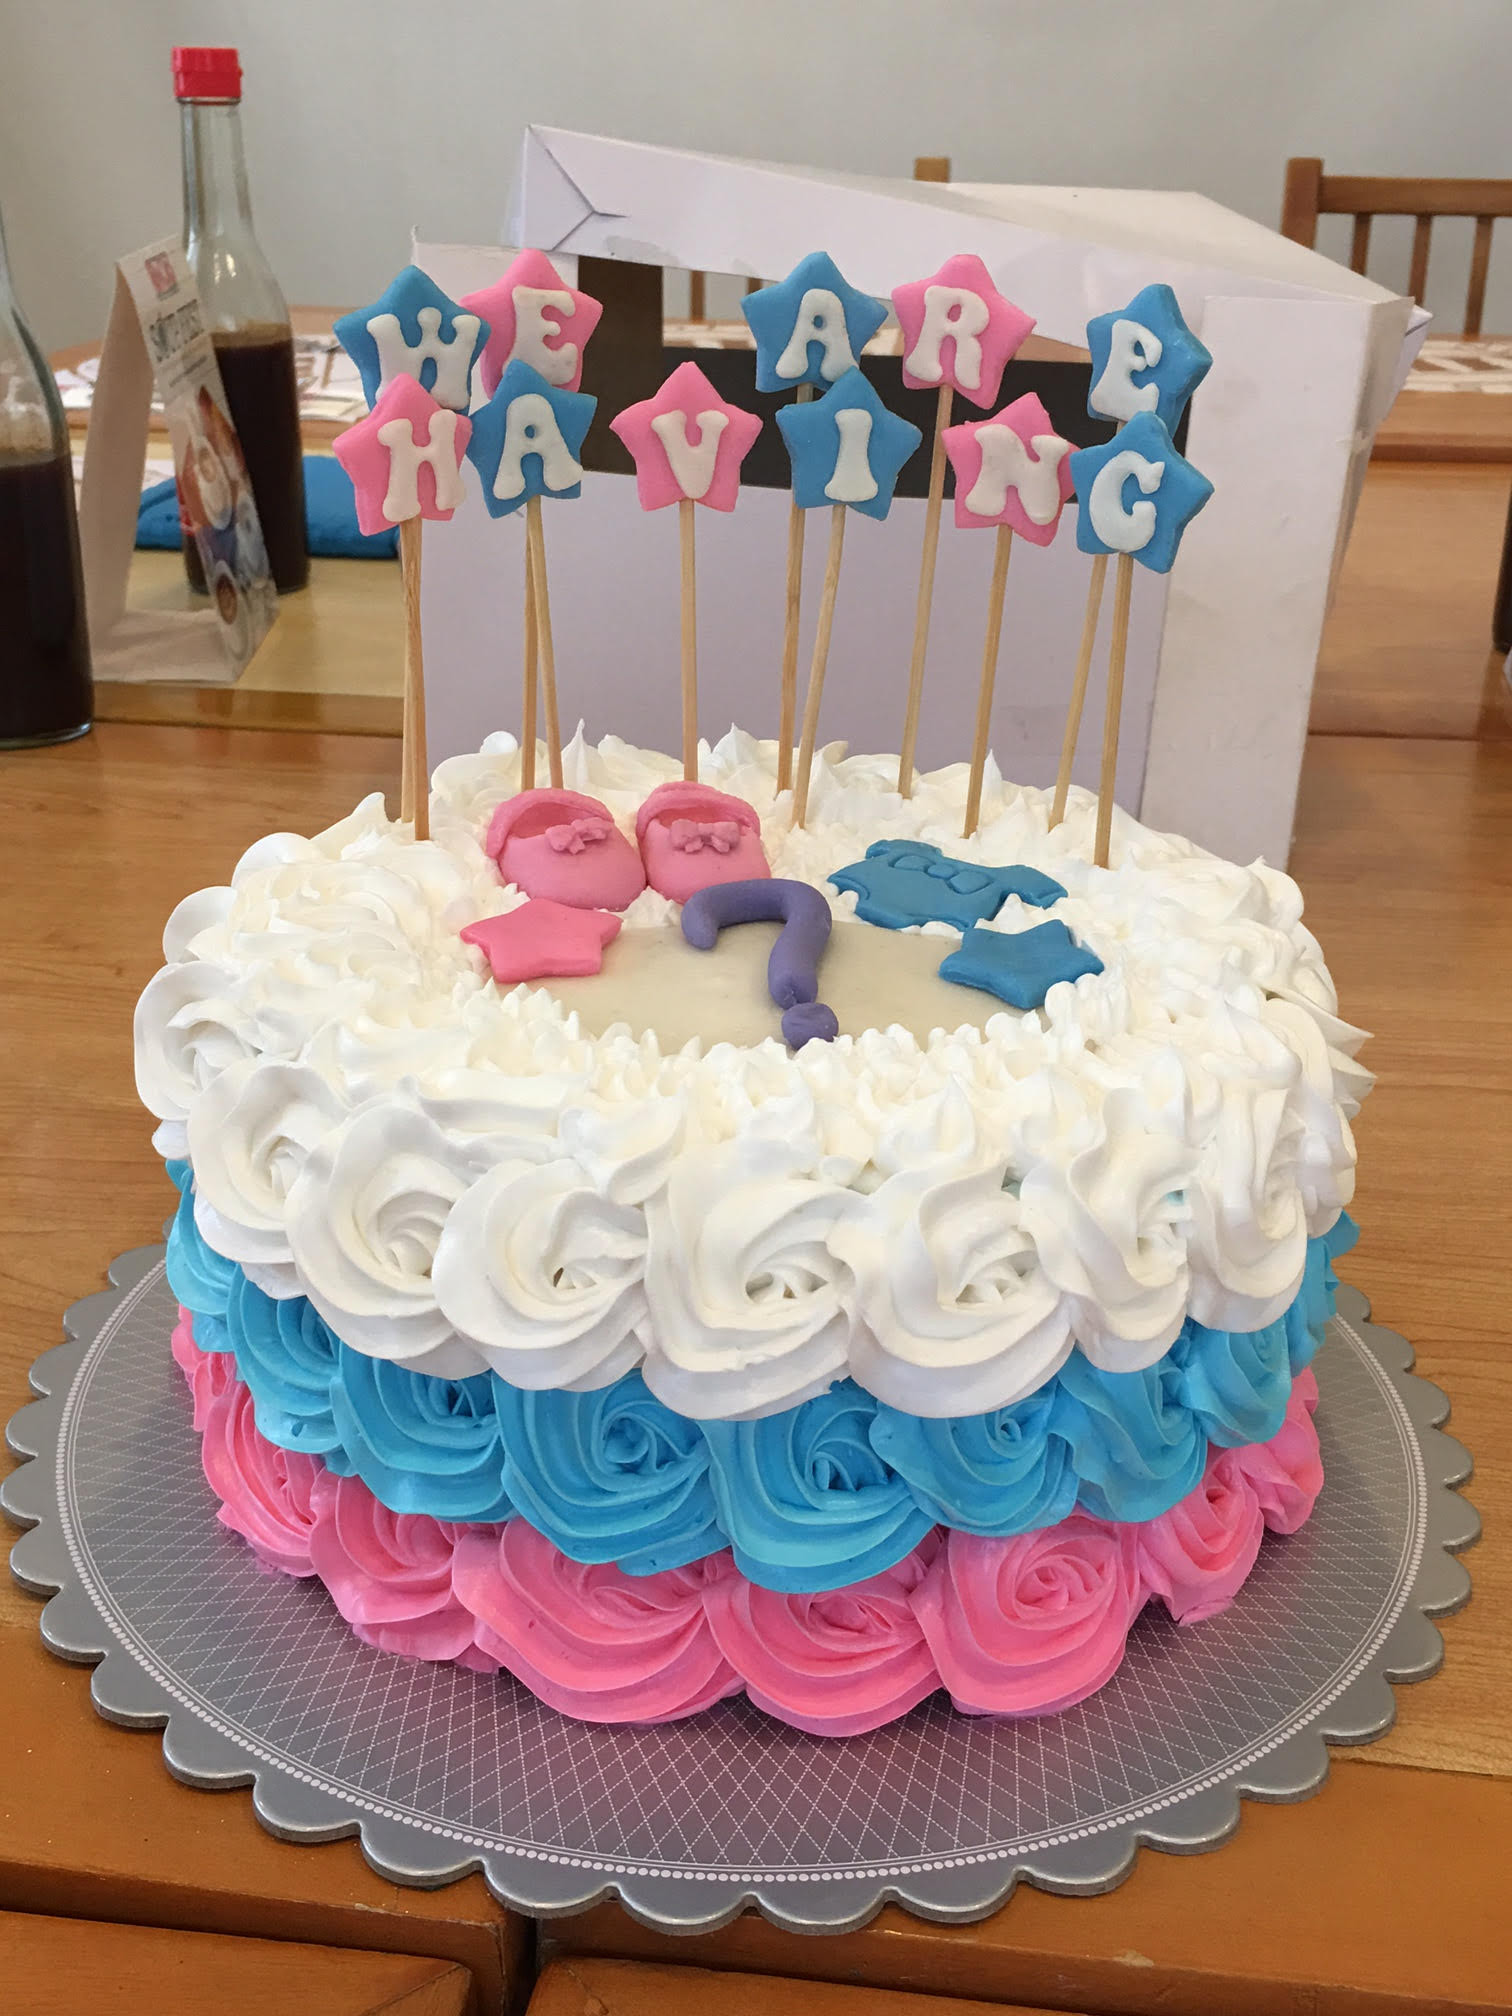 Cake Ideas For Gender Reveal Party
 Gender Reveal Party Restaurant and Cake Review Mccoy